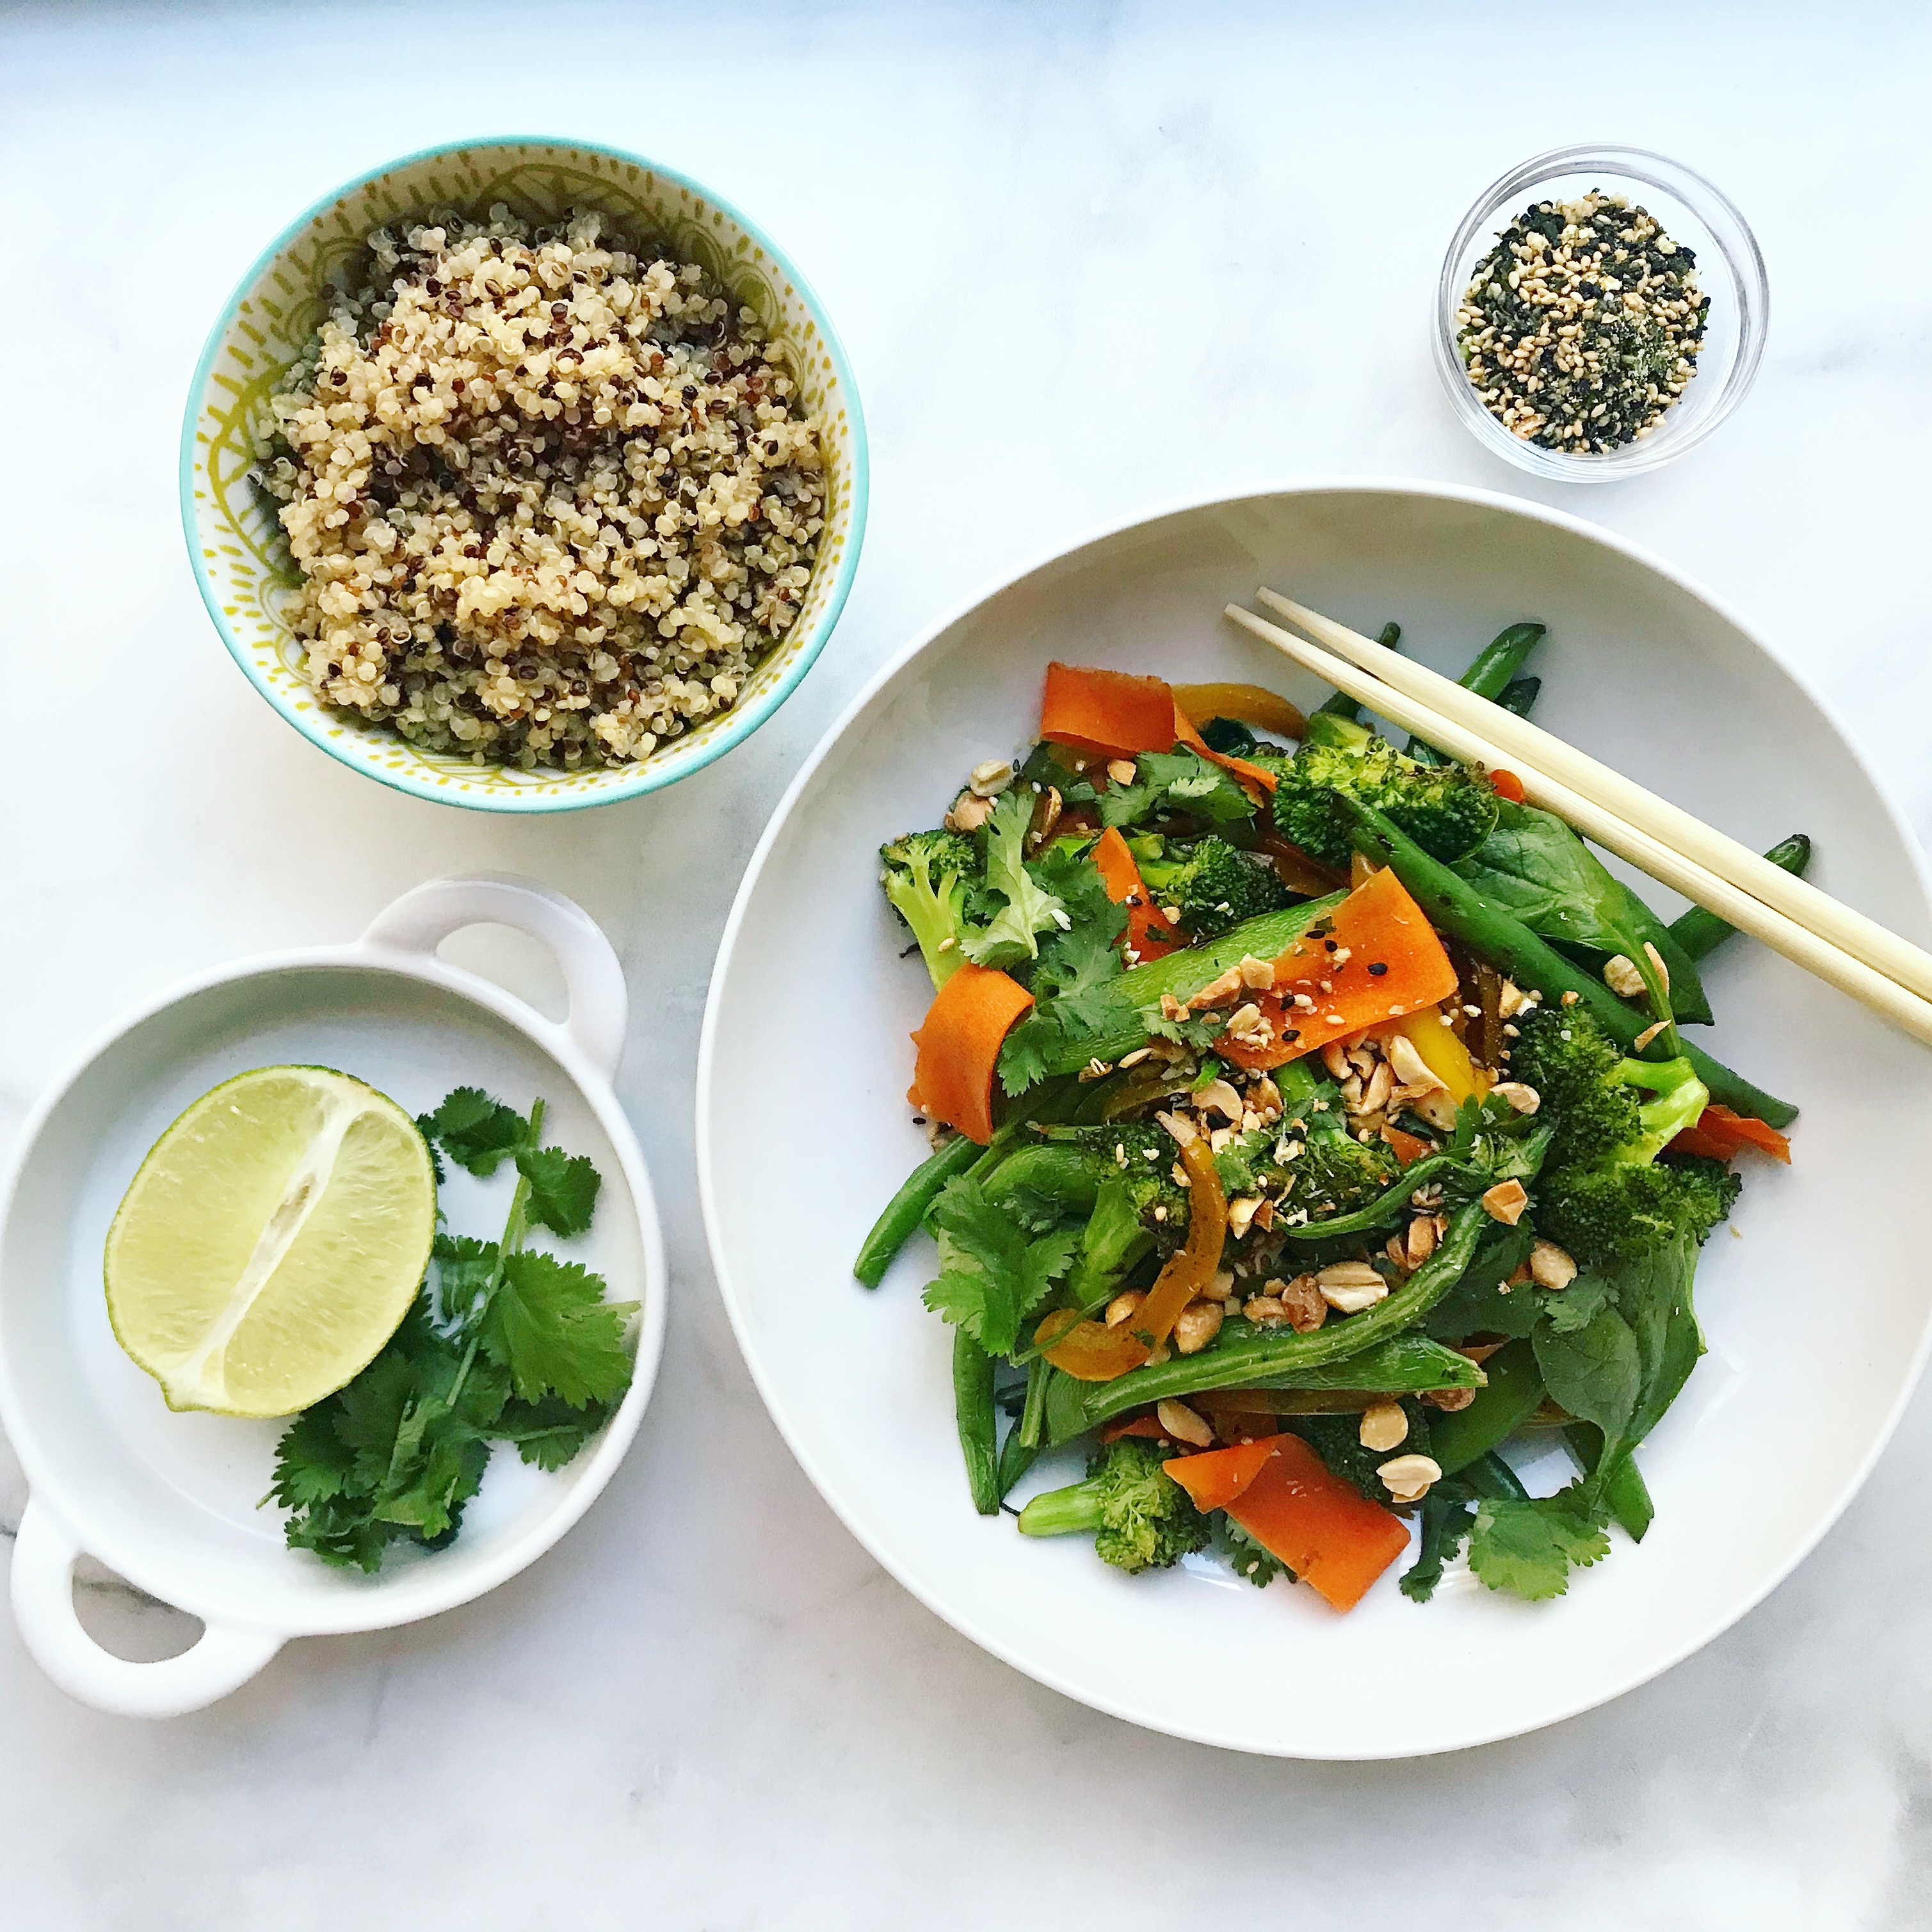 Thai Ginger Peanut Stir-Fry and Tips on How to Get Your Daily Veggies In